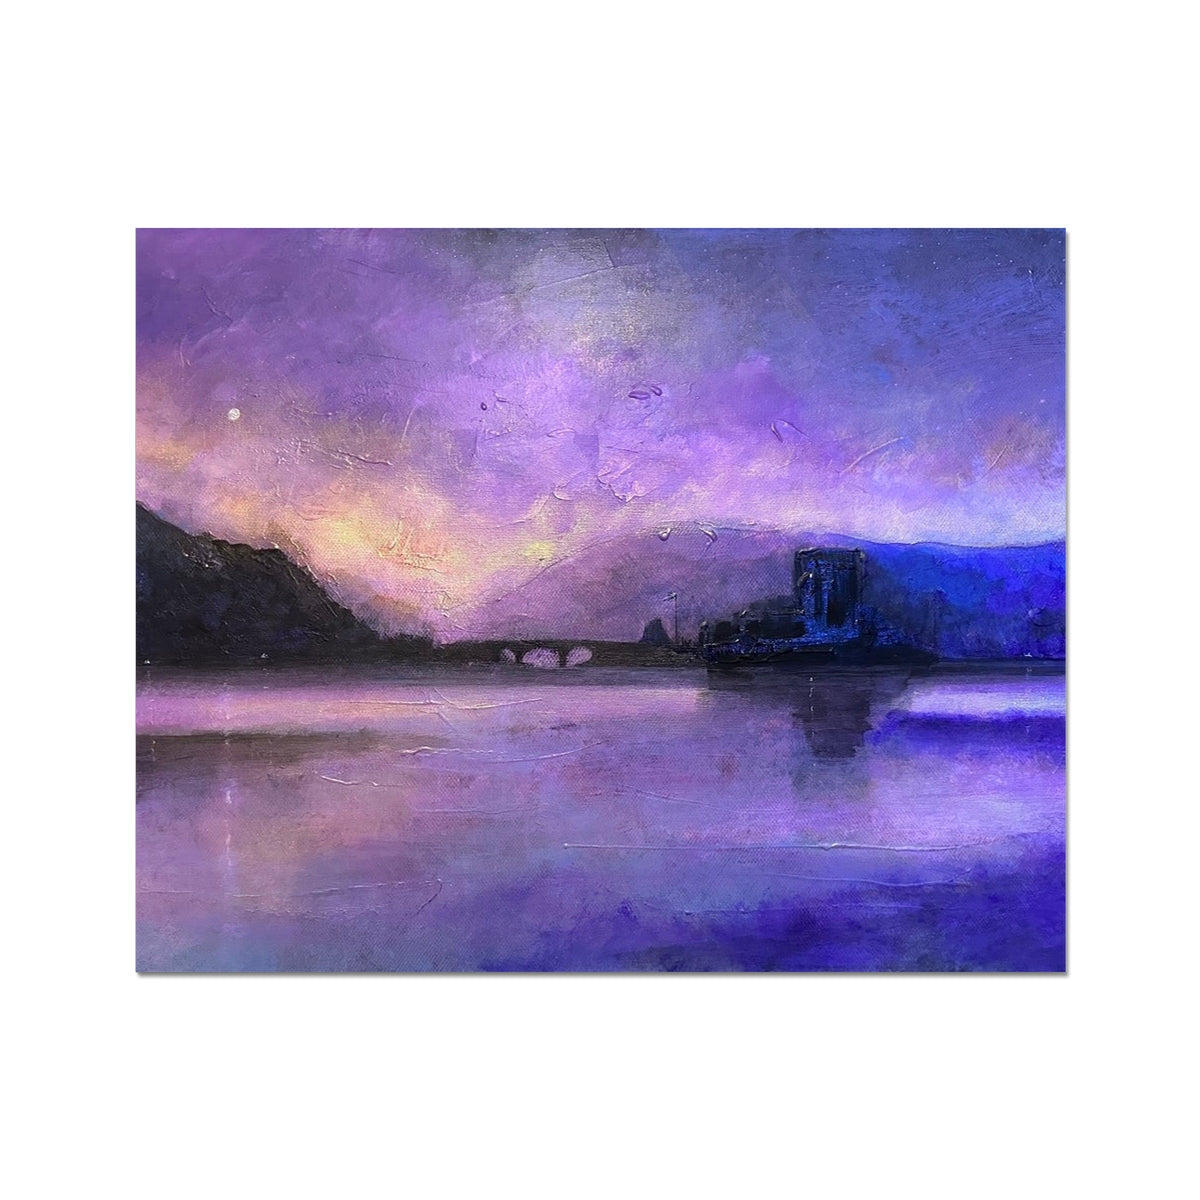 Eilean Donan Castle Moonset Painting | Artist Proof Collector Prints From Scotland-Artist Proof Collector Prints-Historic & Iconic Scotland Art Gallery-20"x16"-Paintings, Prints, Homeware, Art Gifts From Scotland By Scottish Artist Kevin Hunter